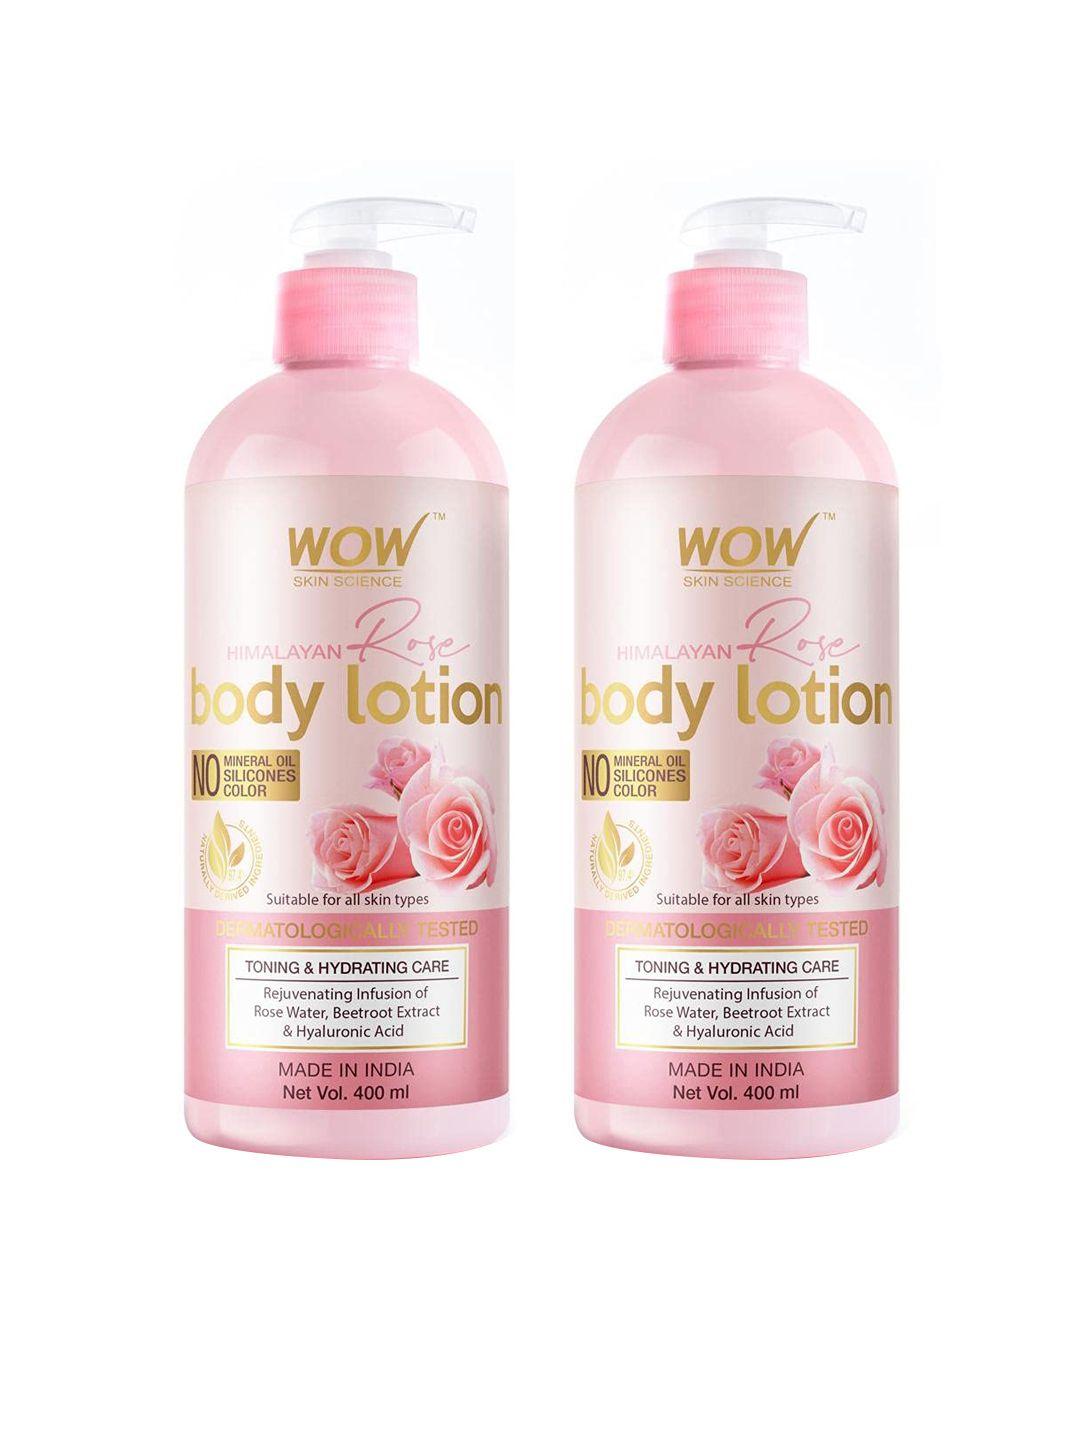 wow skin science set of 2 himalayan rose toning & hydrating body lotion - 400 ml each